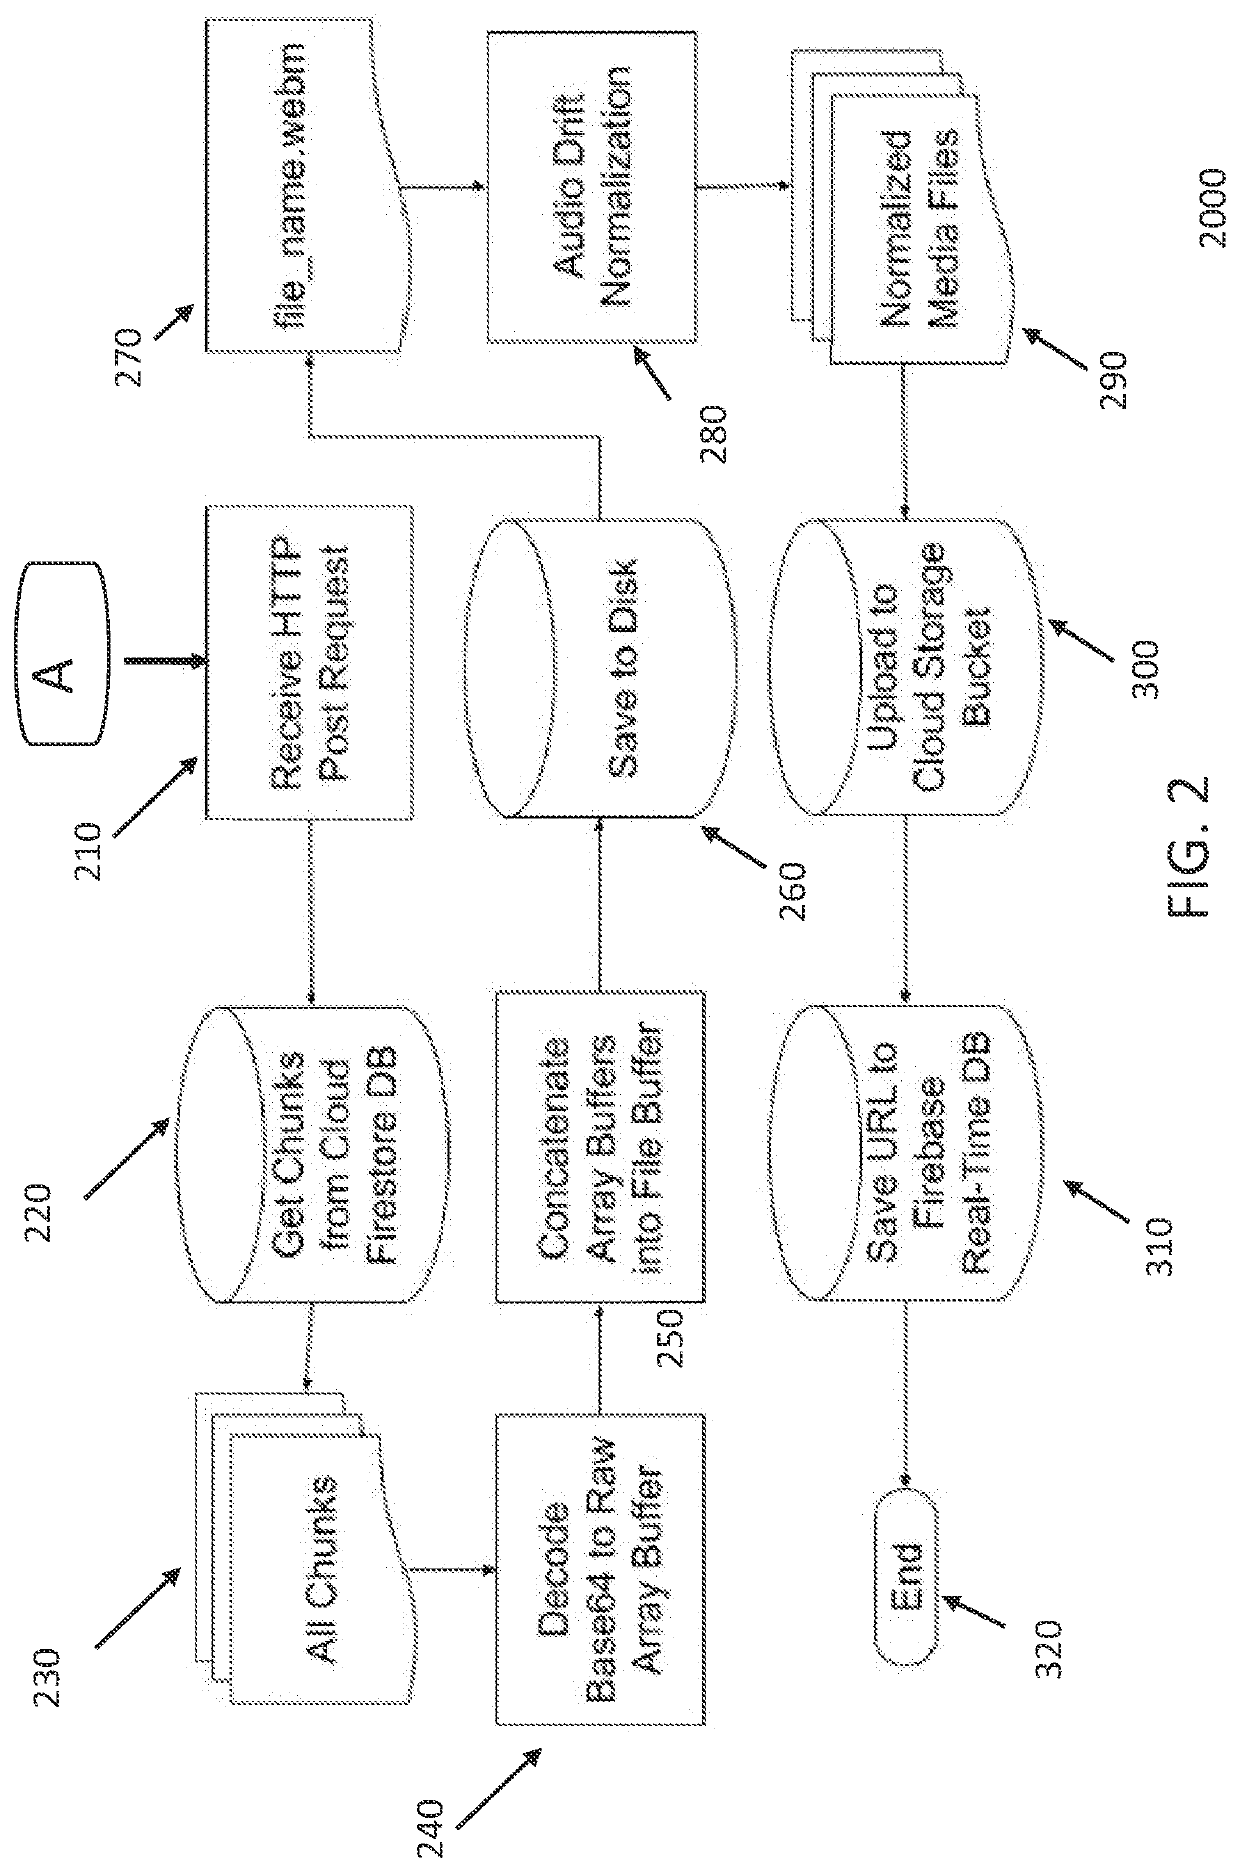 Simultaneous recording and uploading of multiple audio files of the same conversation and audio drift normalization systems and methods